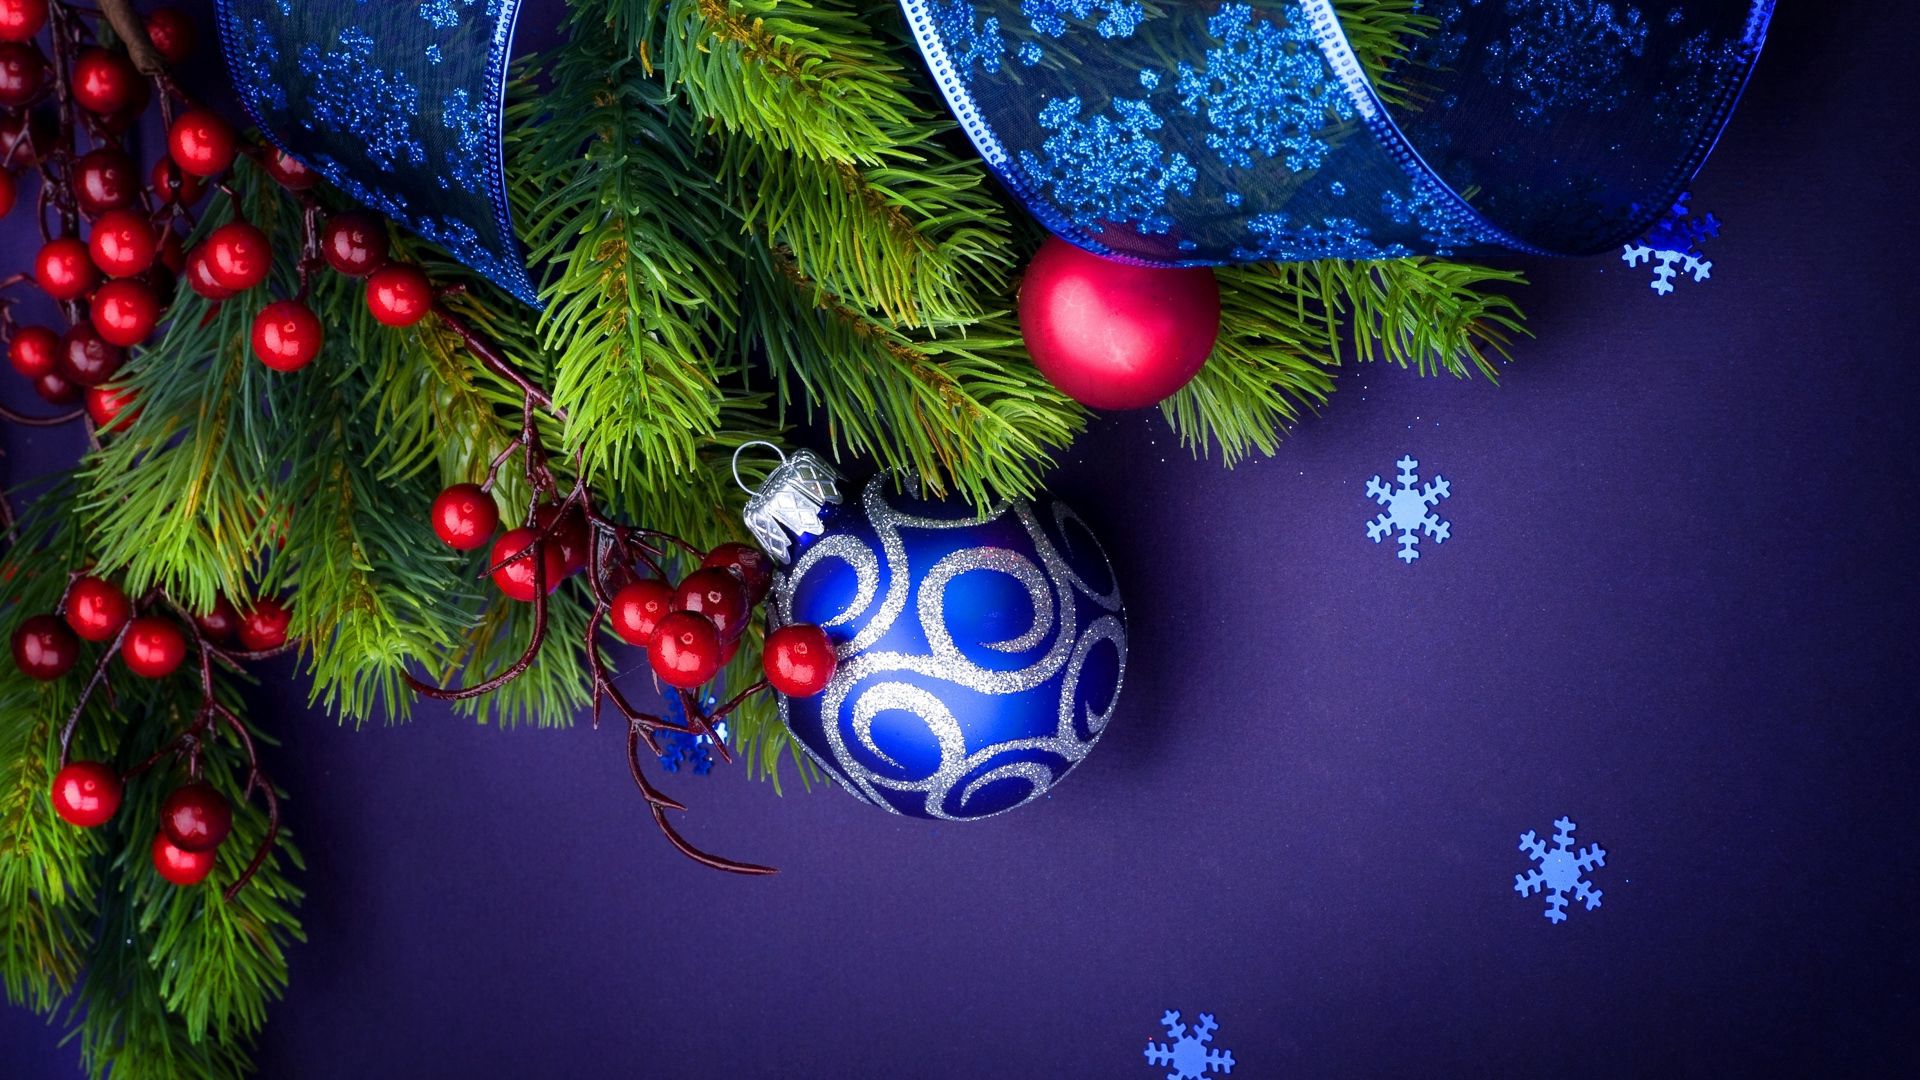 android ball, holidays, new year, decorations, spruce, fir